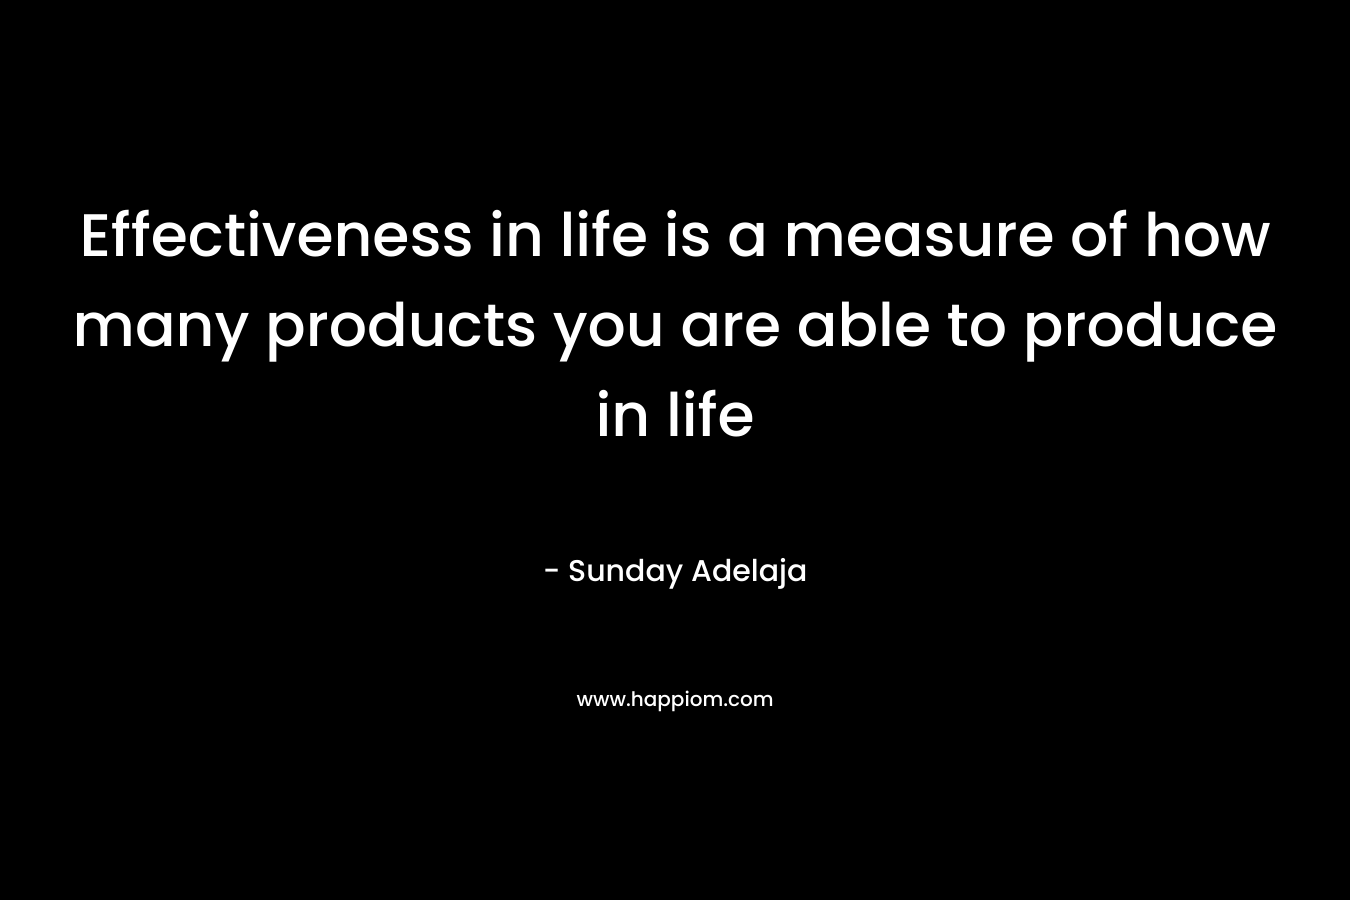 Effectiveness in life is a measure of how many products you are able to produce in life